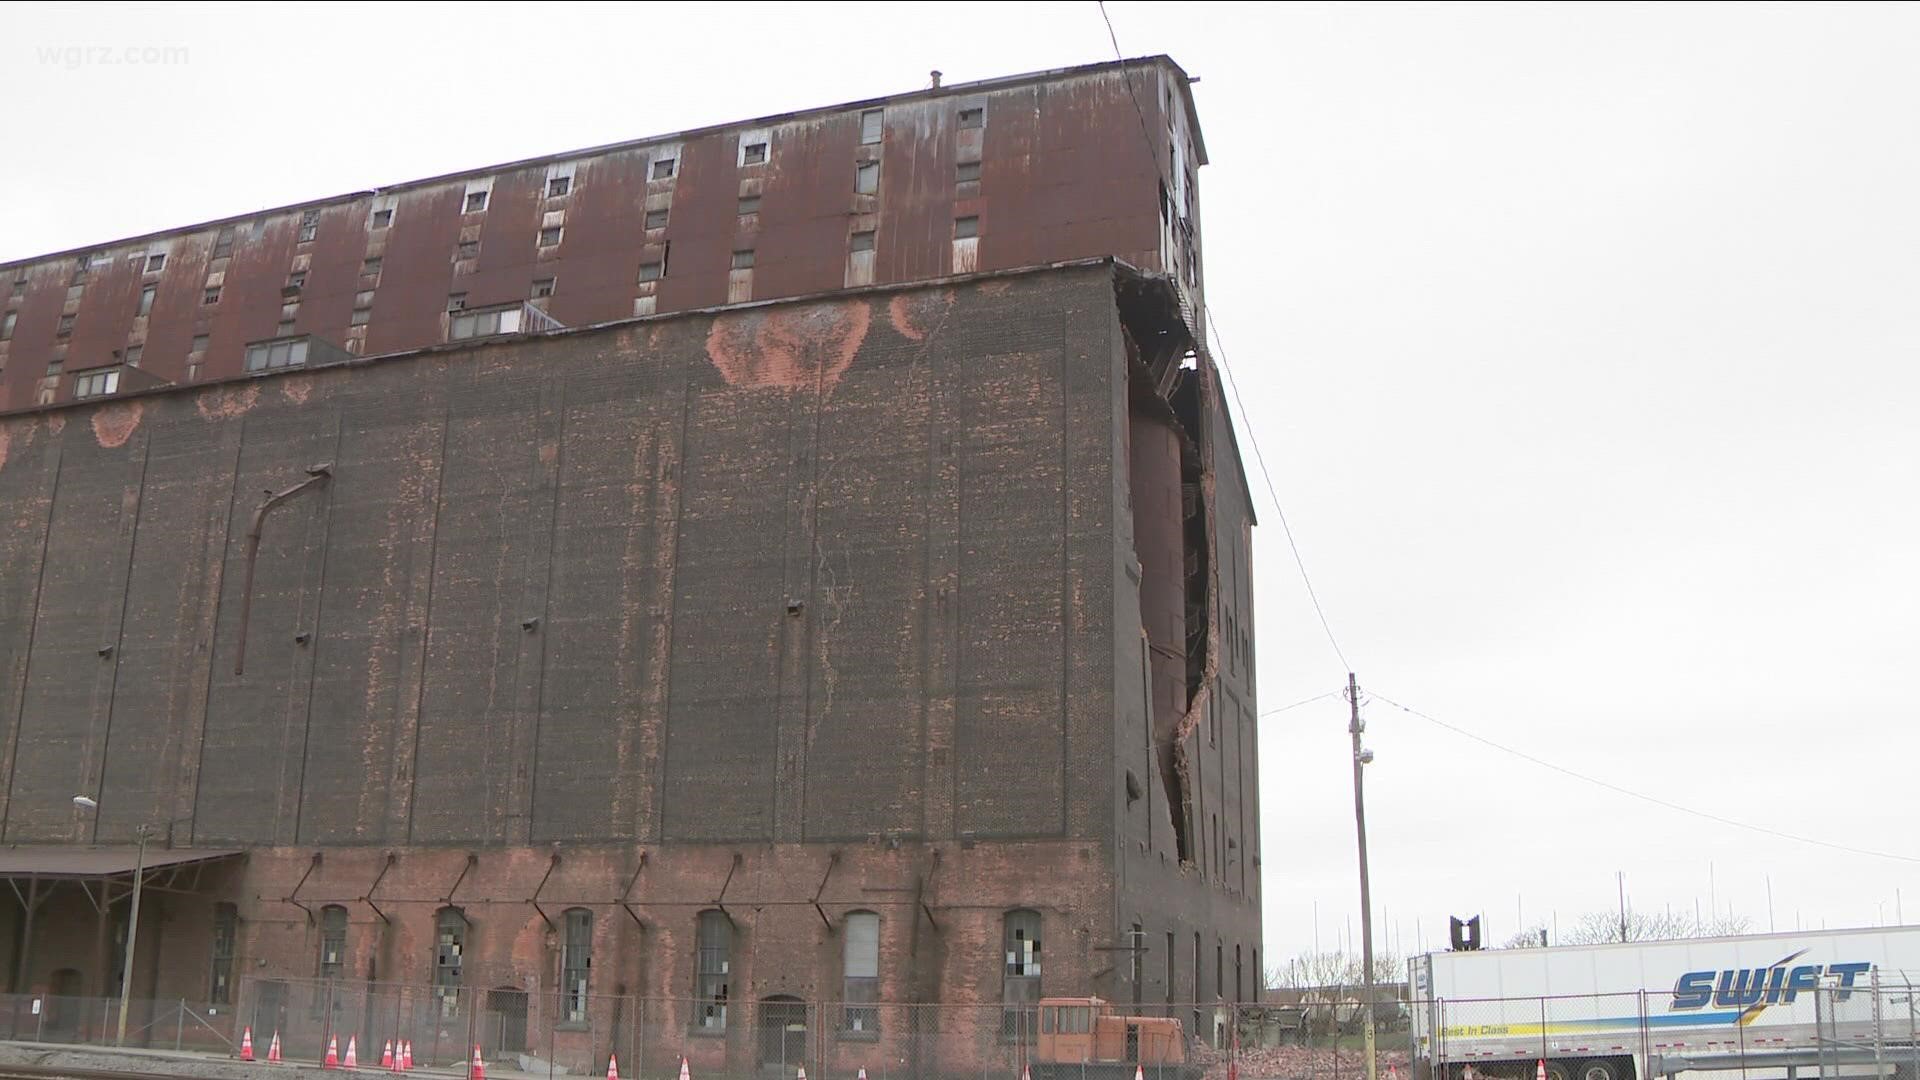 As it waits to see if the courts will be sympathetic to its cause to save the building, the campaign for Greater Buffalo is now appealing directly to Mayor Brown.